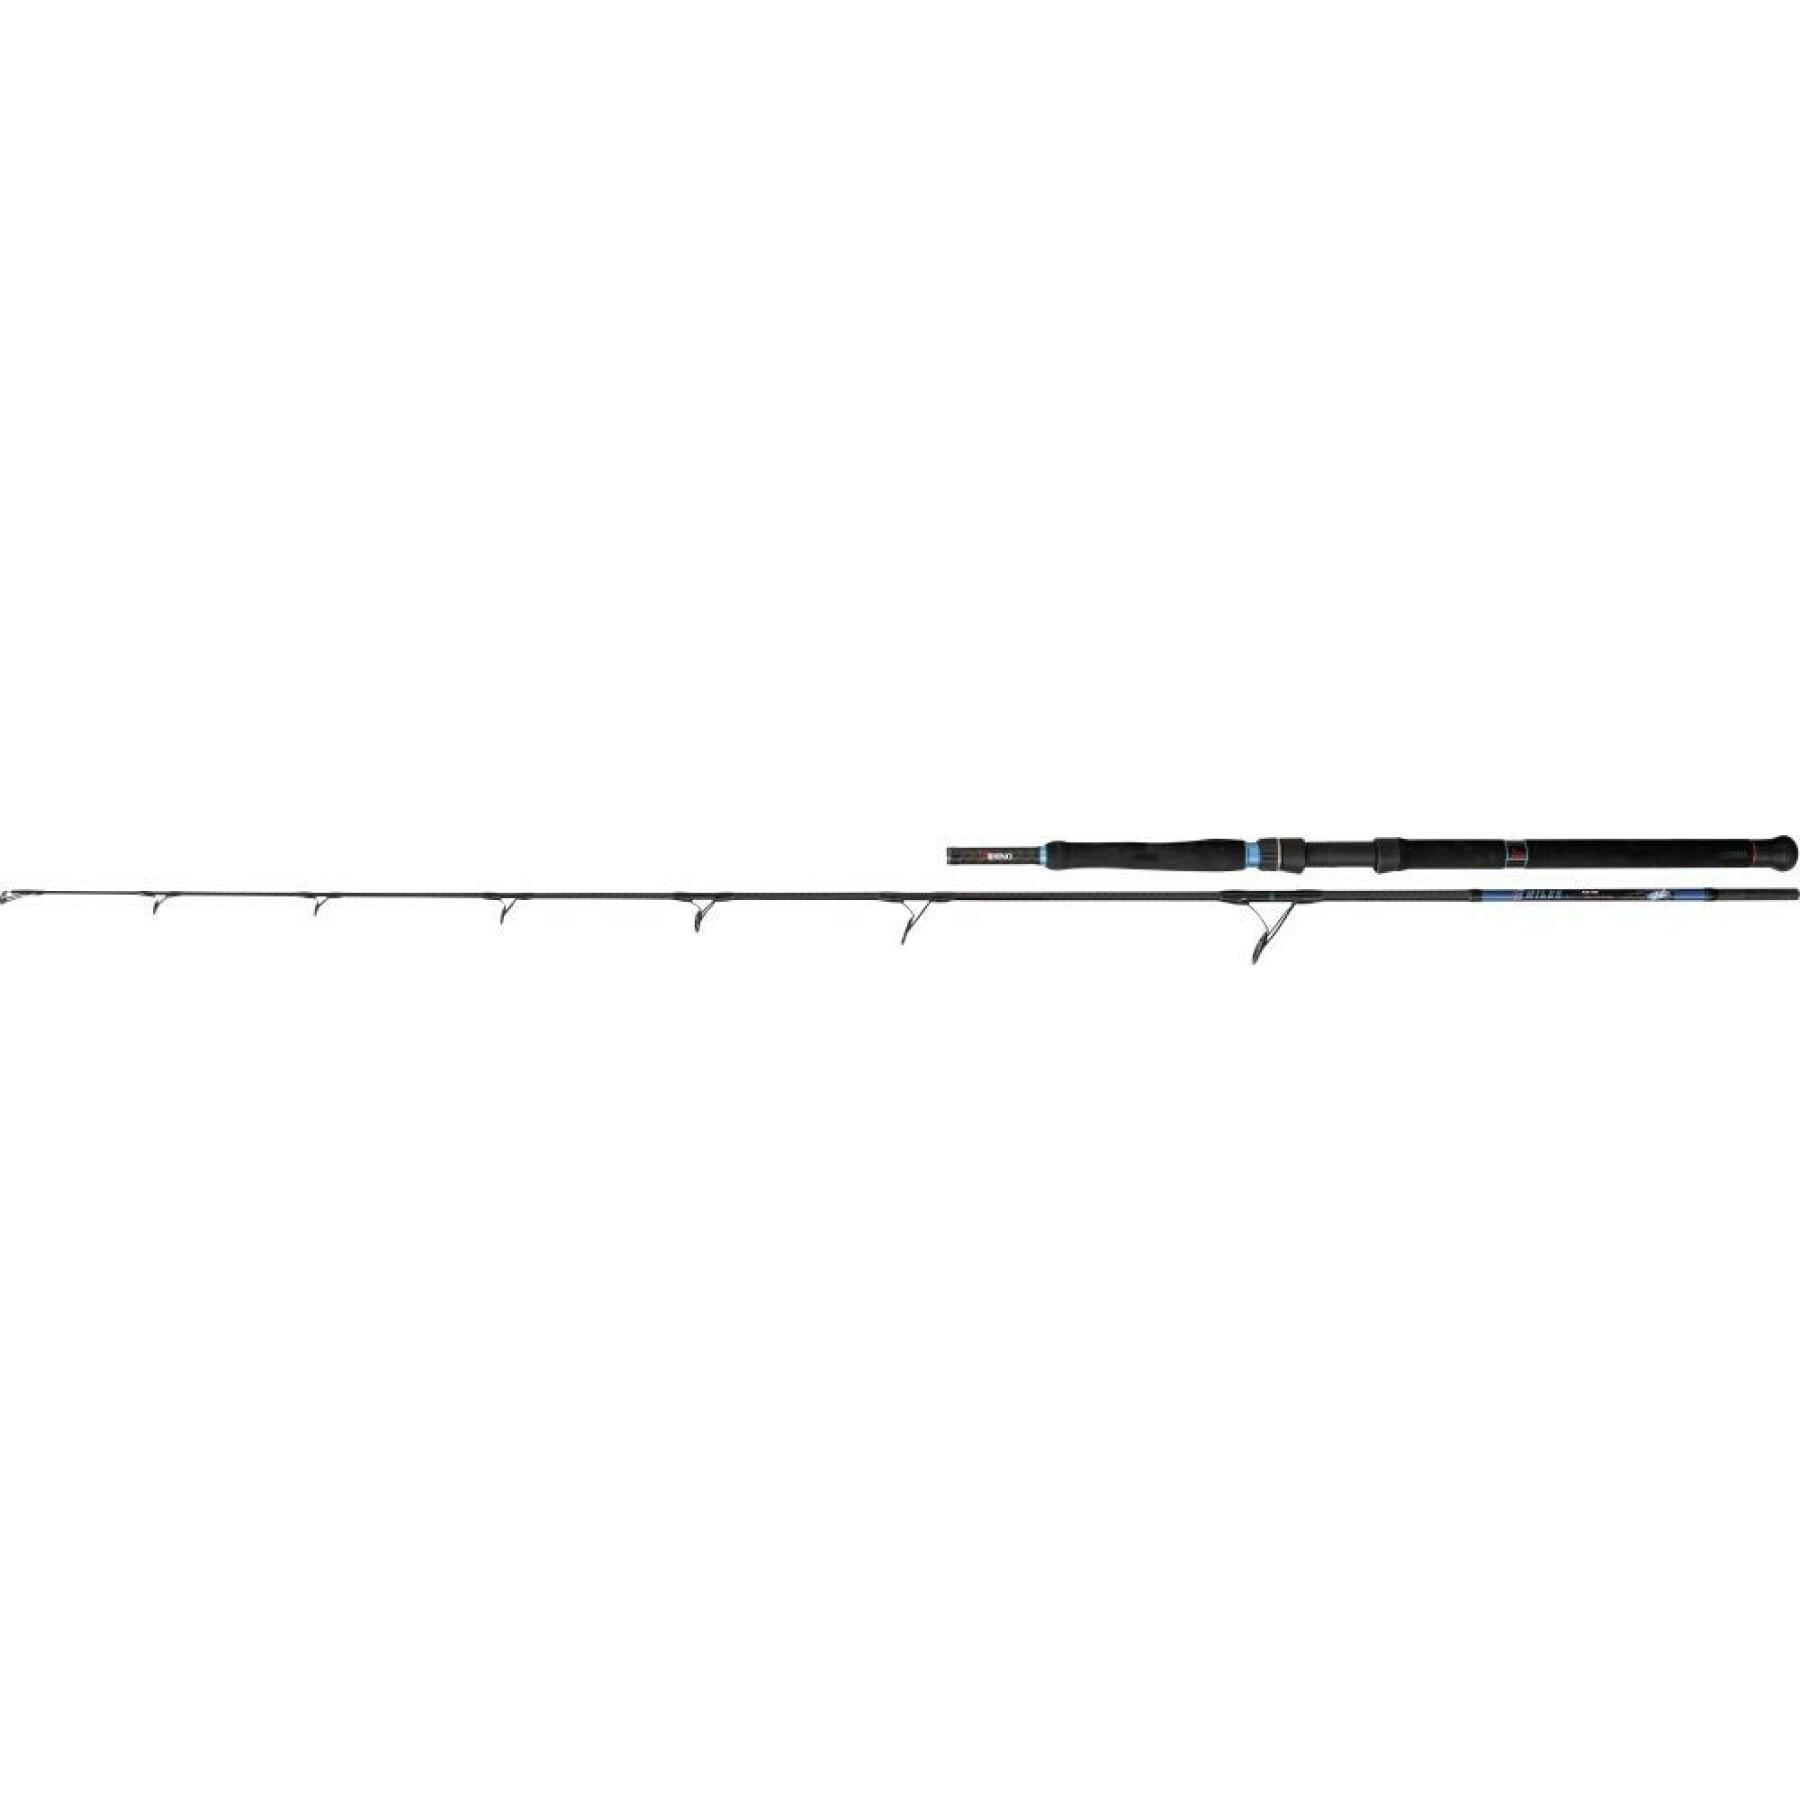 Cane Rhino 8 Miles Out Blue Fish 90-180g